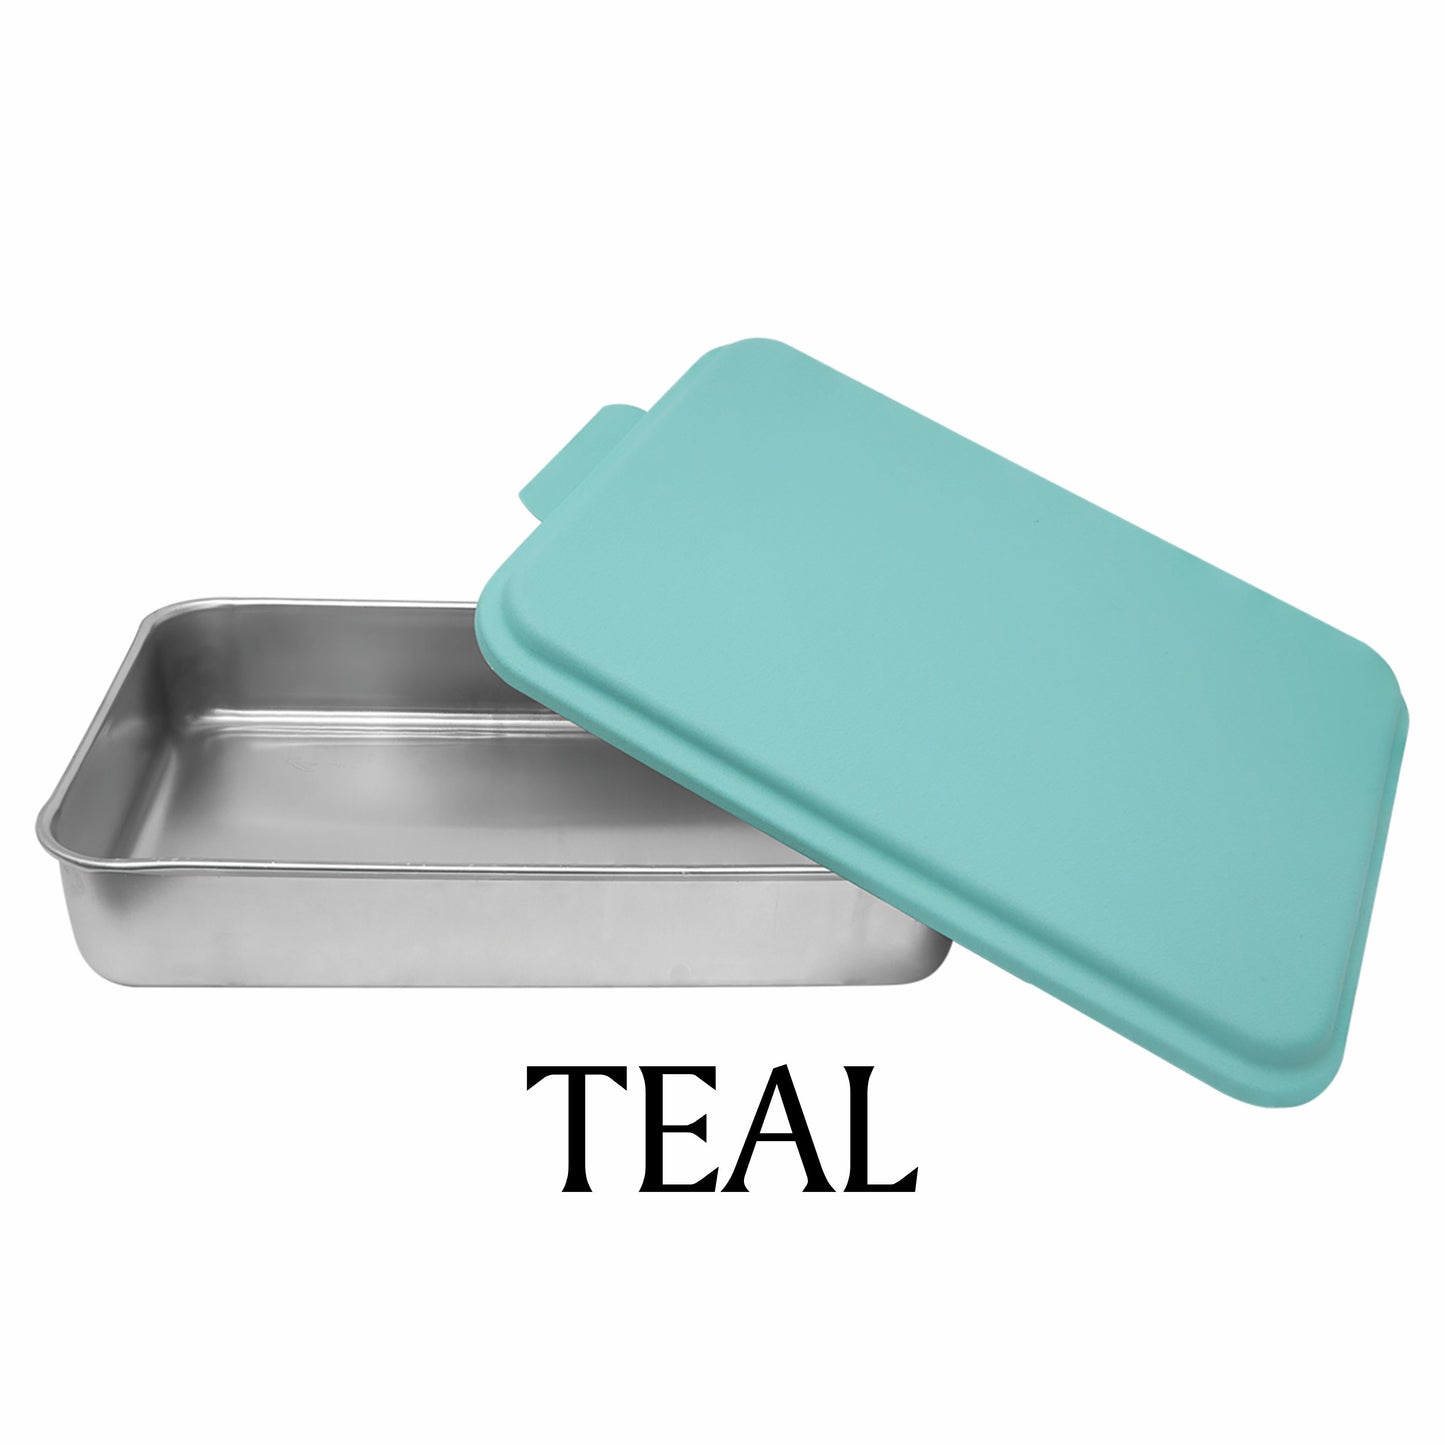 Personalized 9"x 13" aluminum cake pan with engraved lid | A Baker's Heart